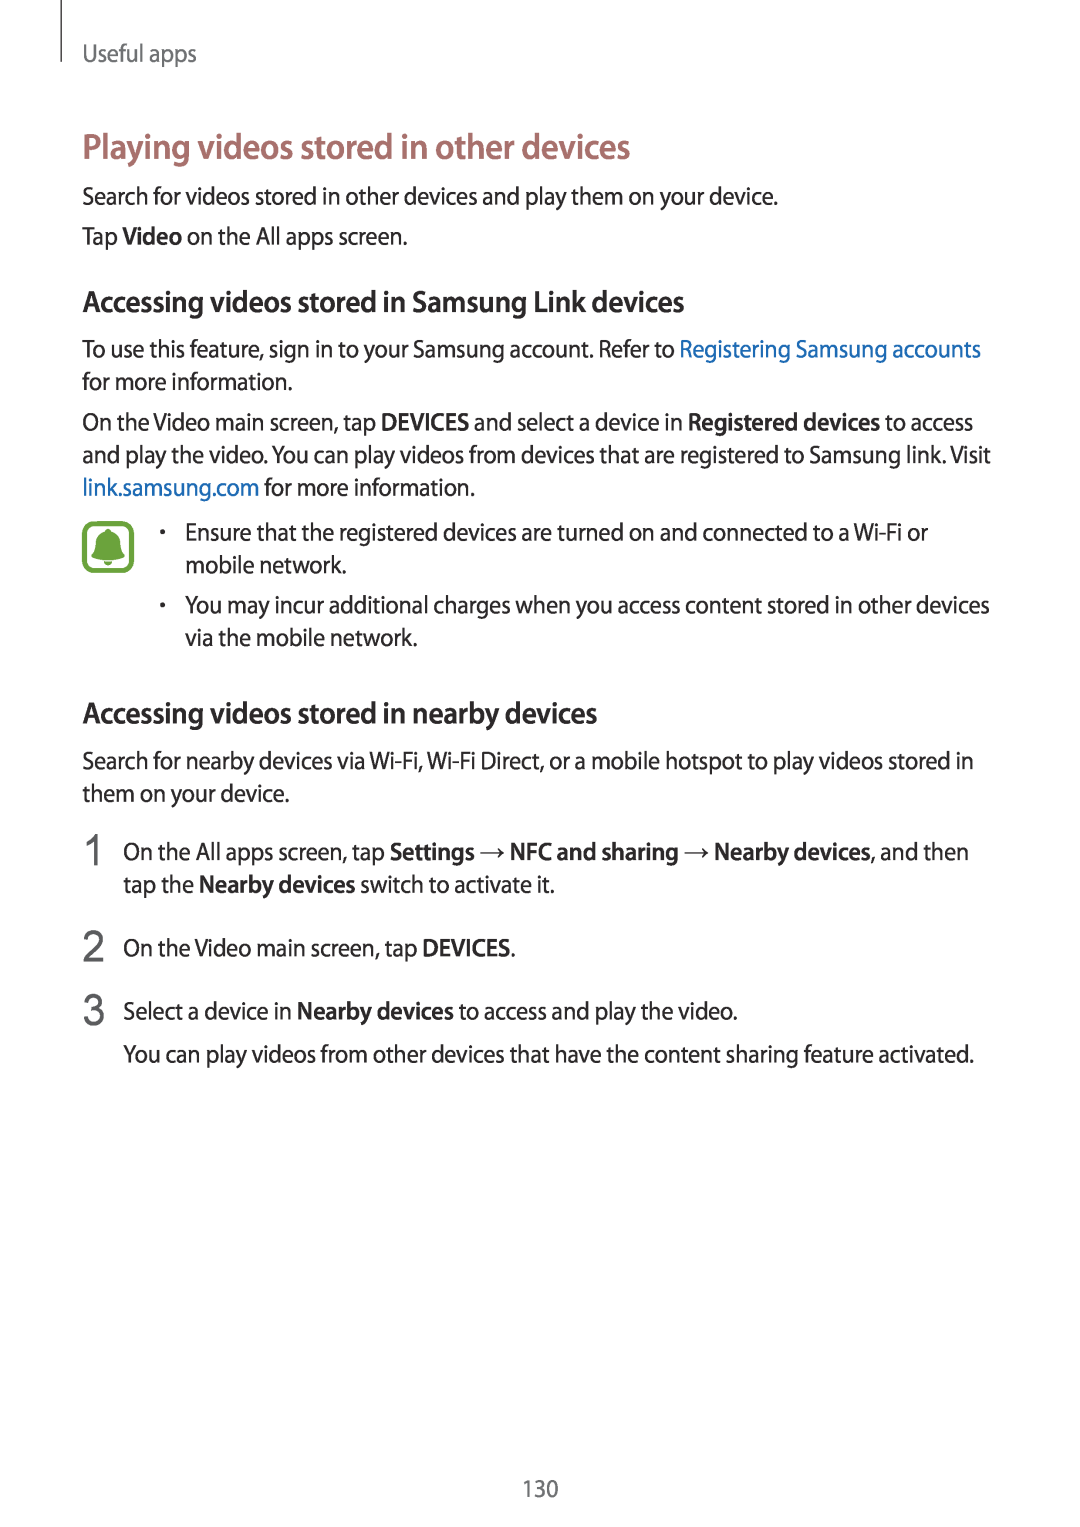 Samsung SM-N915FZKYEUR manual Playing videos stored in other devices, Accessing videos stored in Samsung Link devices 